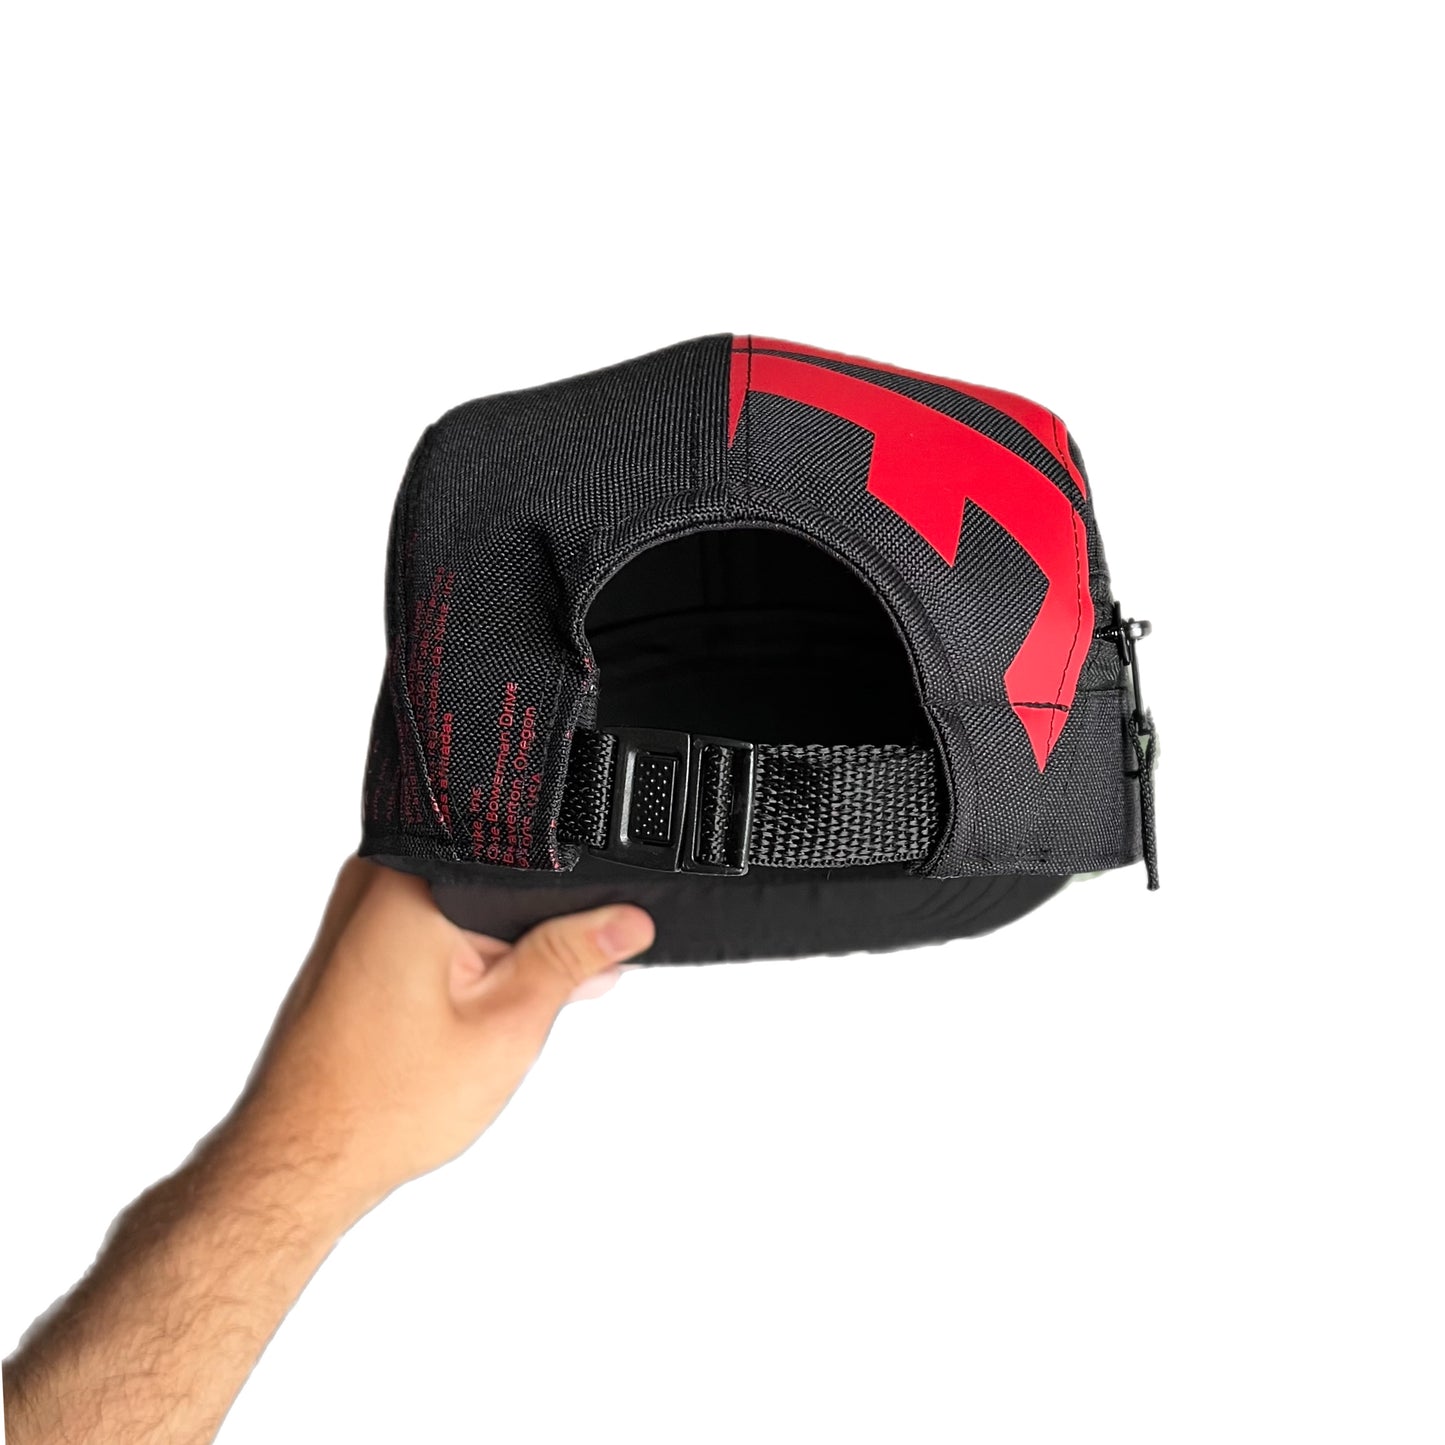 Bred Shoe Box Hat (Made to order)